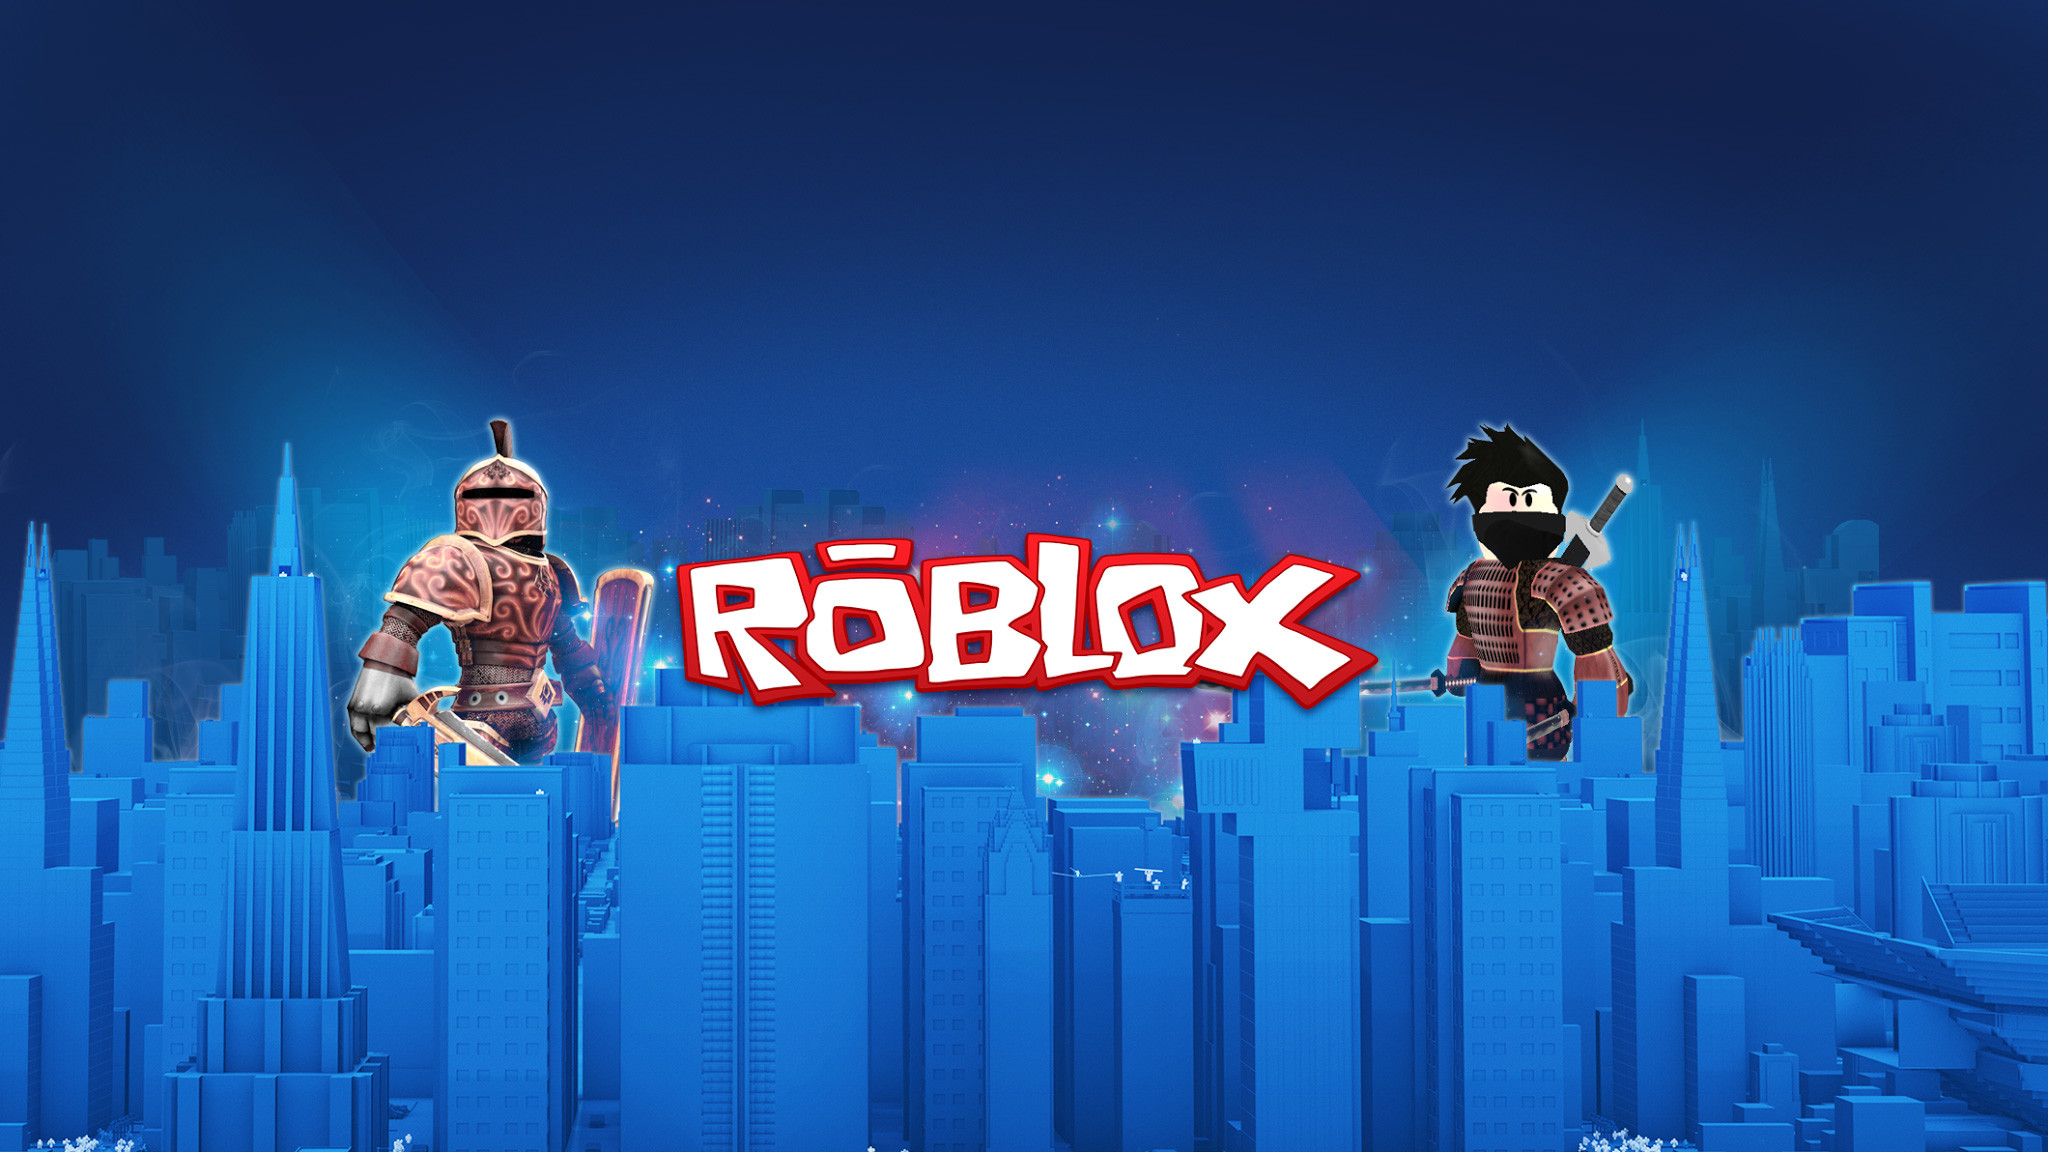 Download Roblox Theme For Windows 10